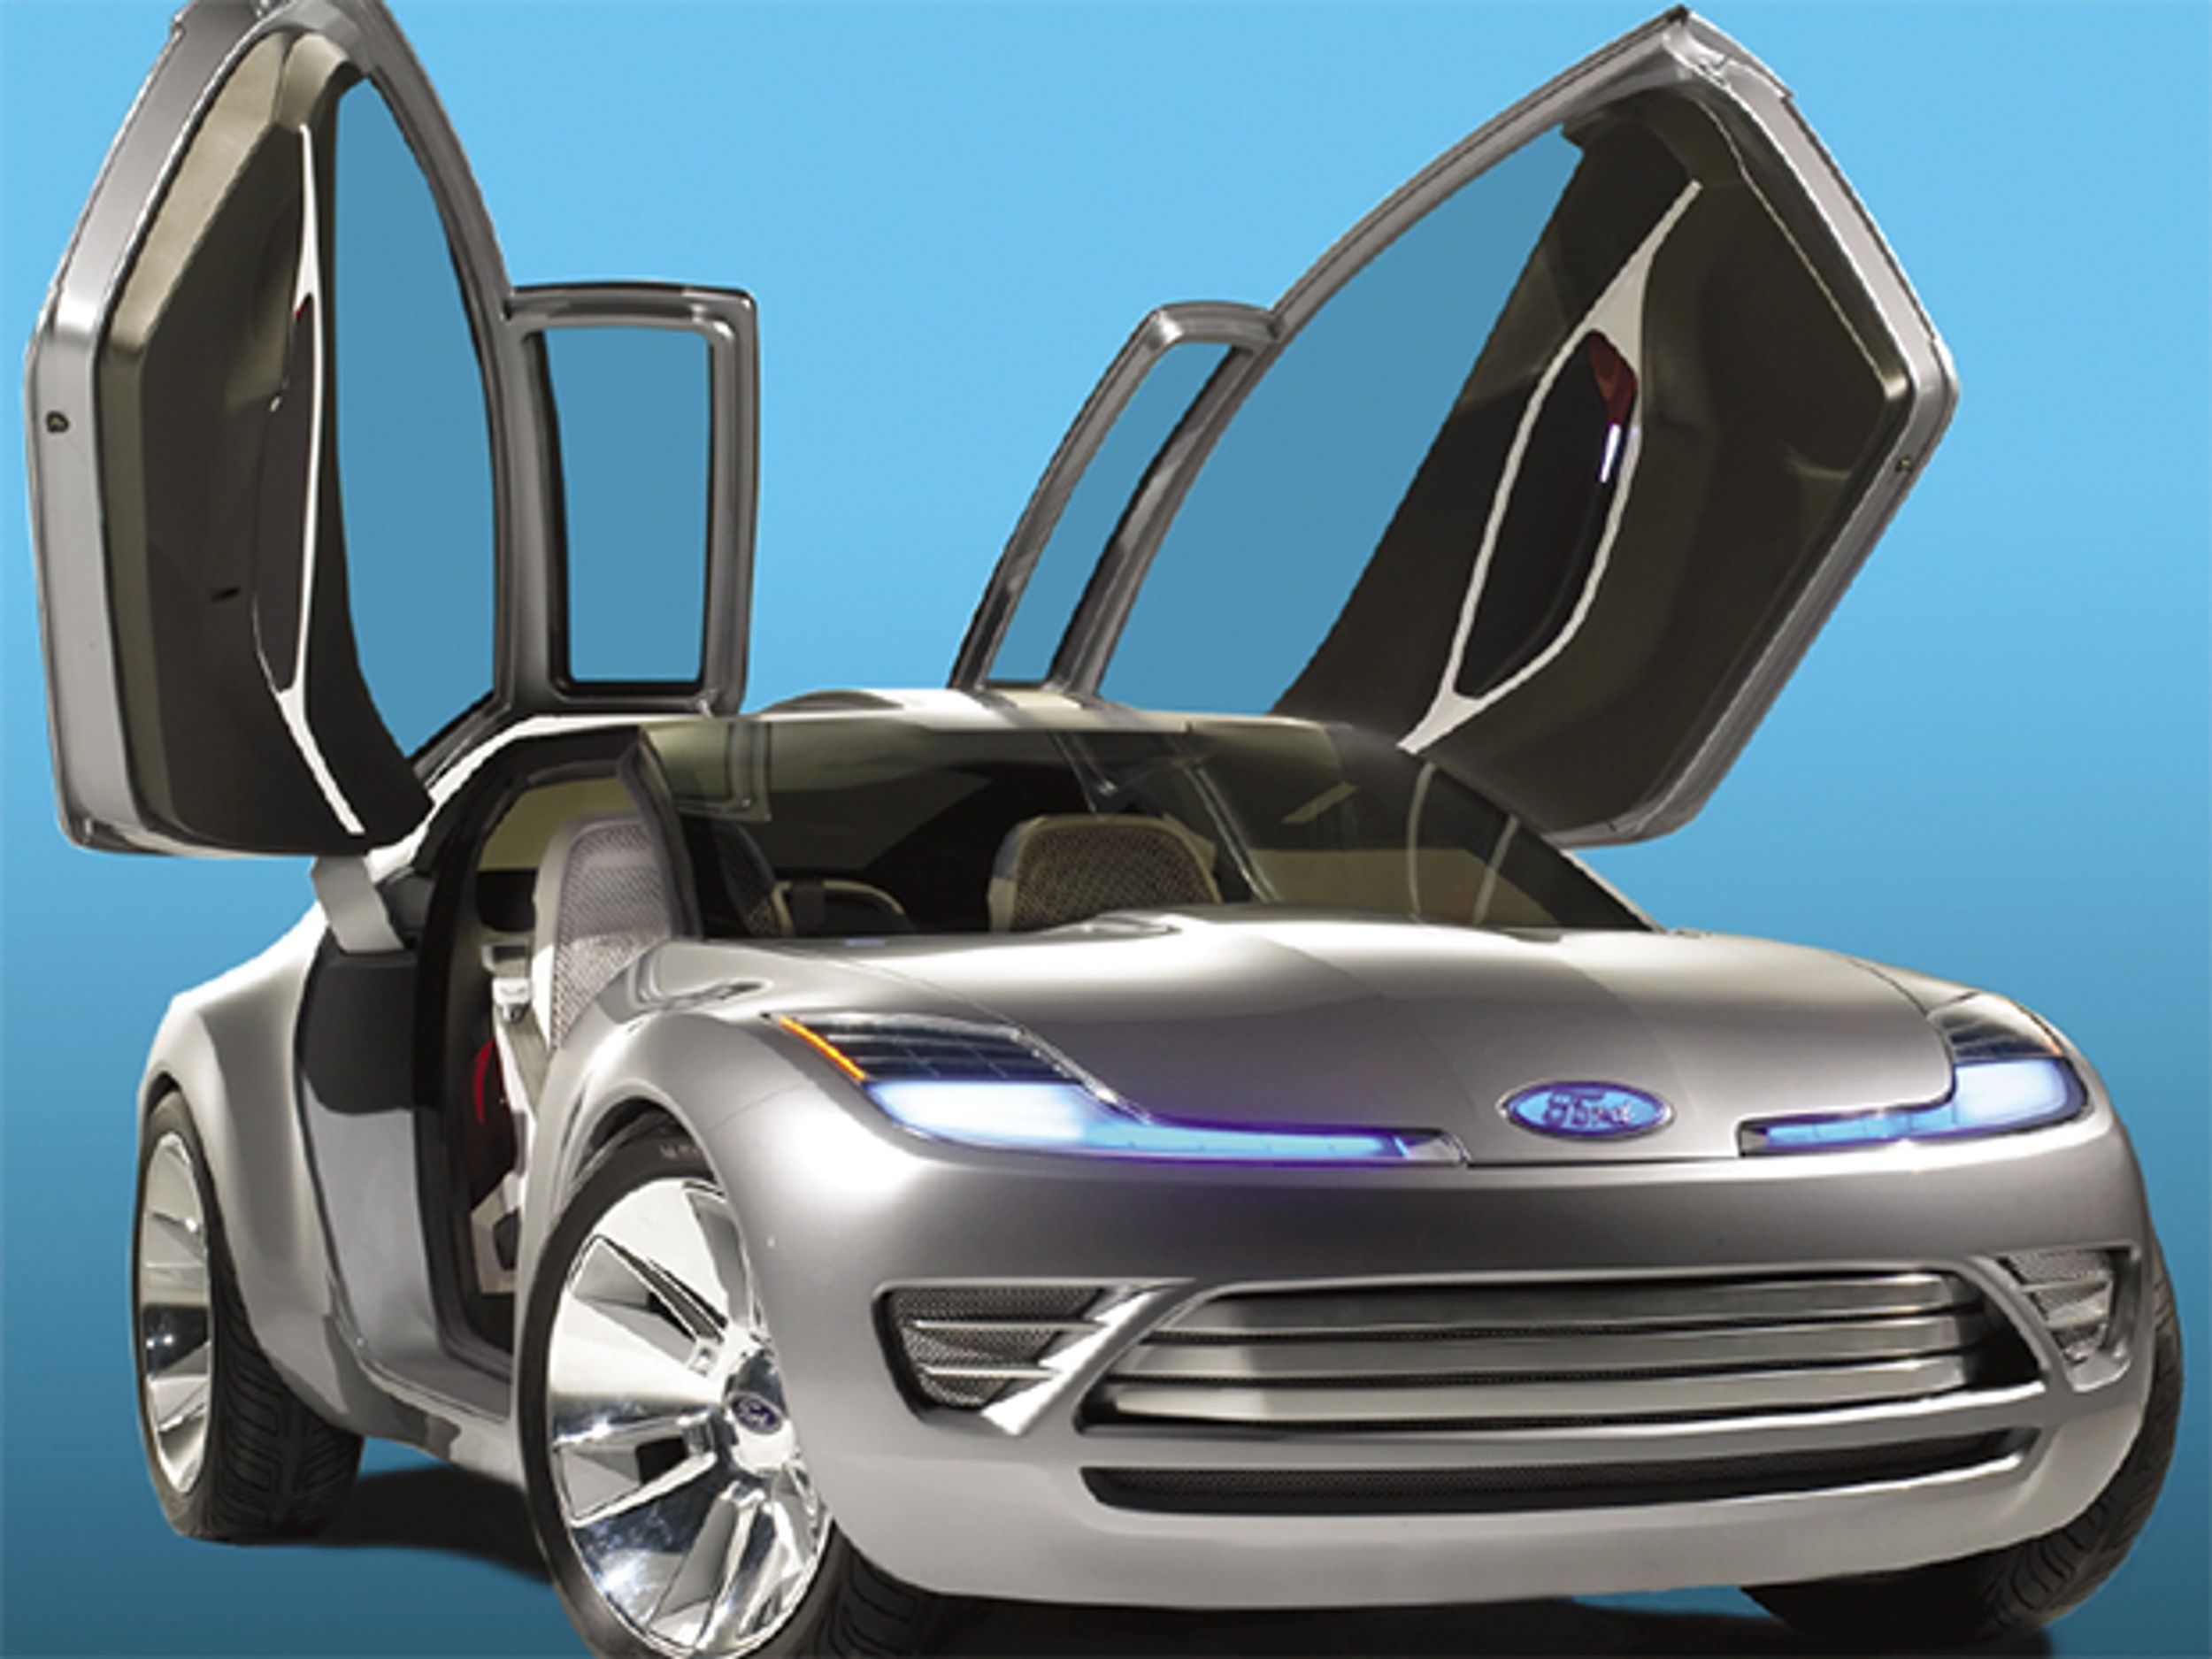 Photo of Ford's Reflex concept car